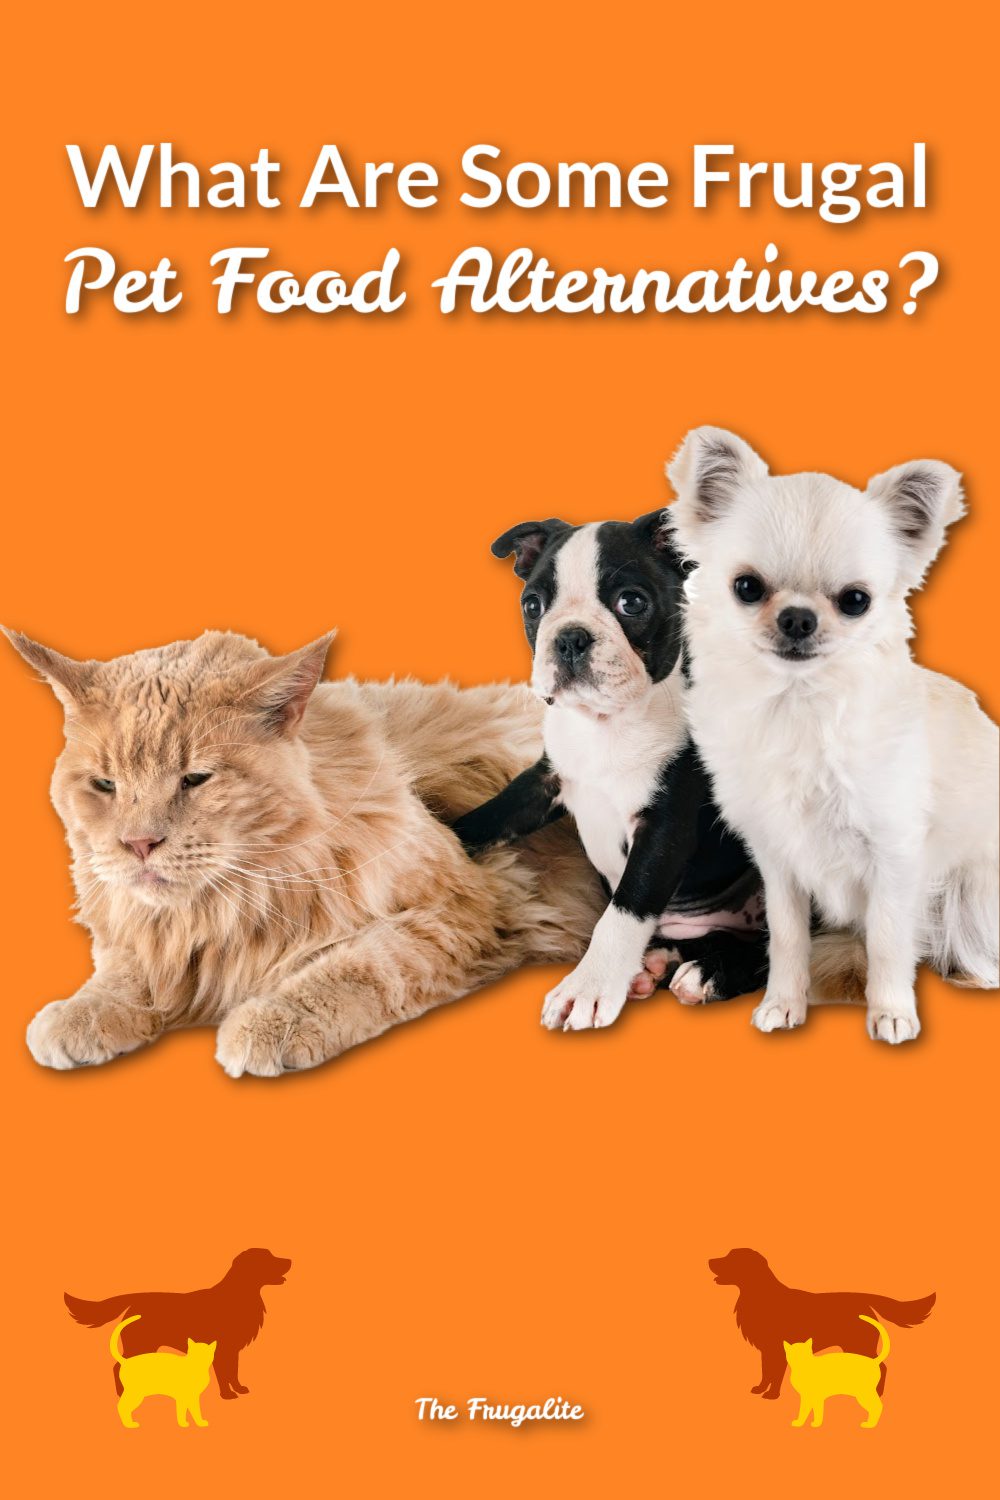 What Are Some Frugal Pet Food Alternatives?